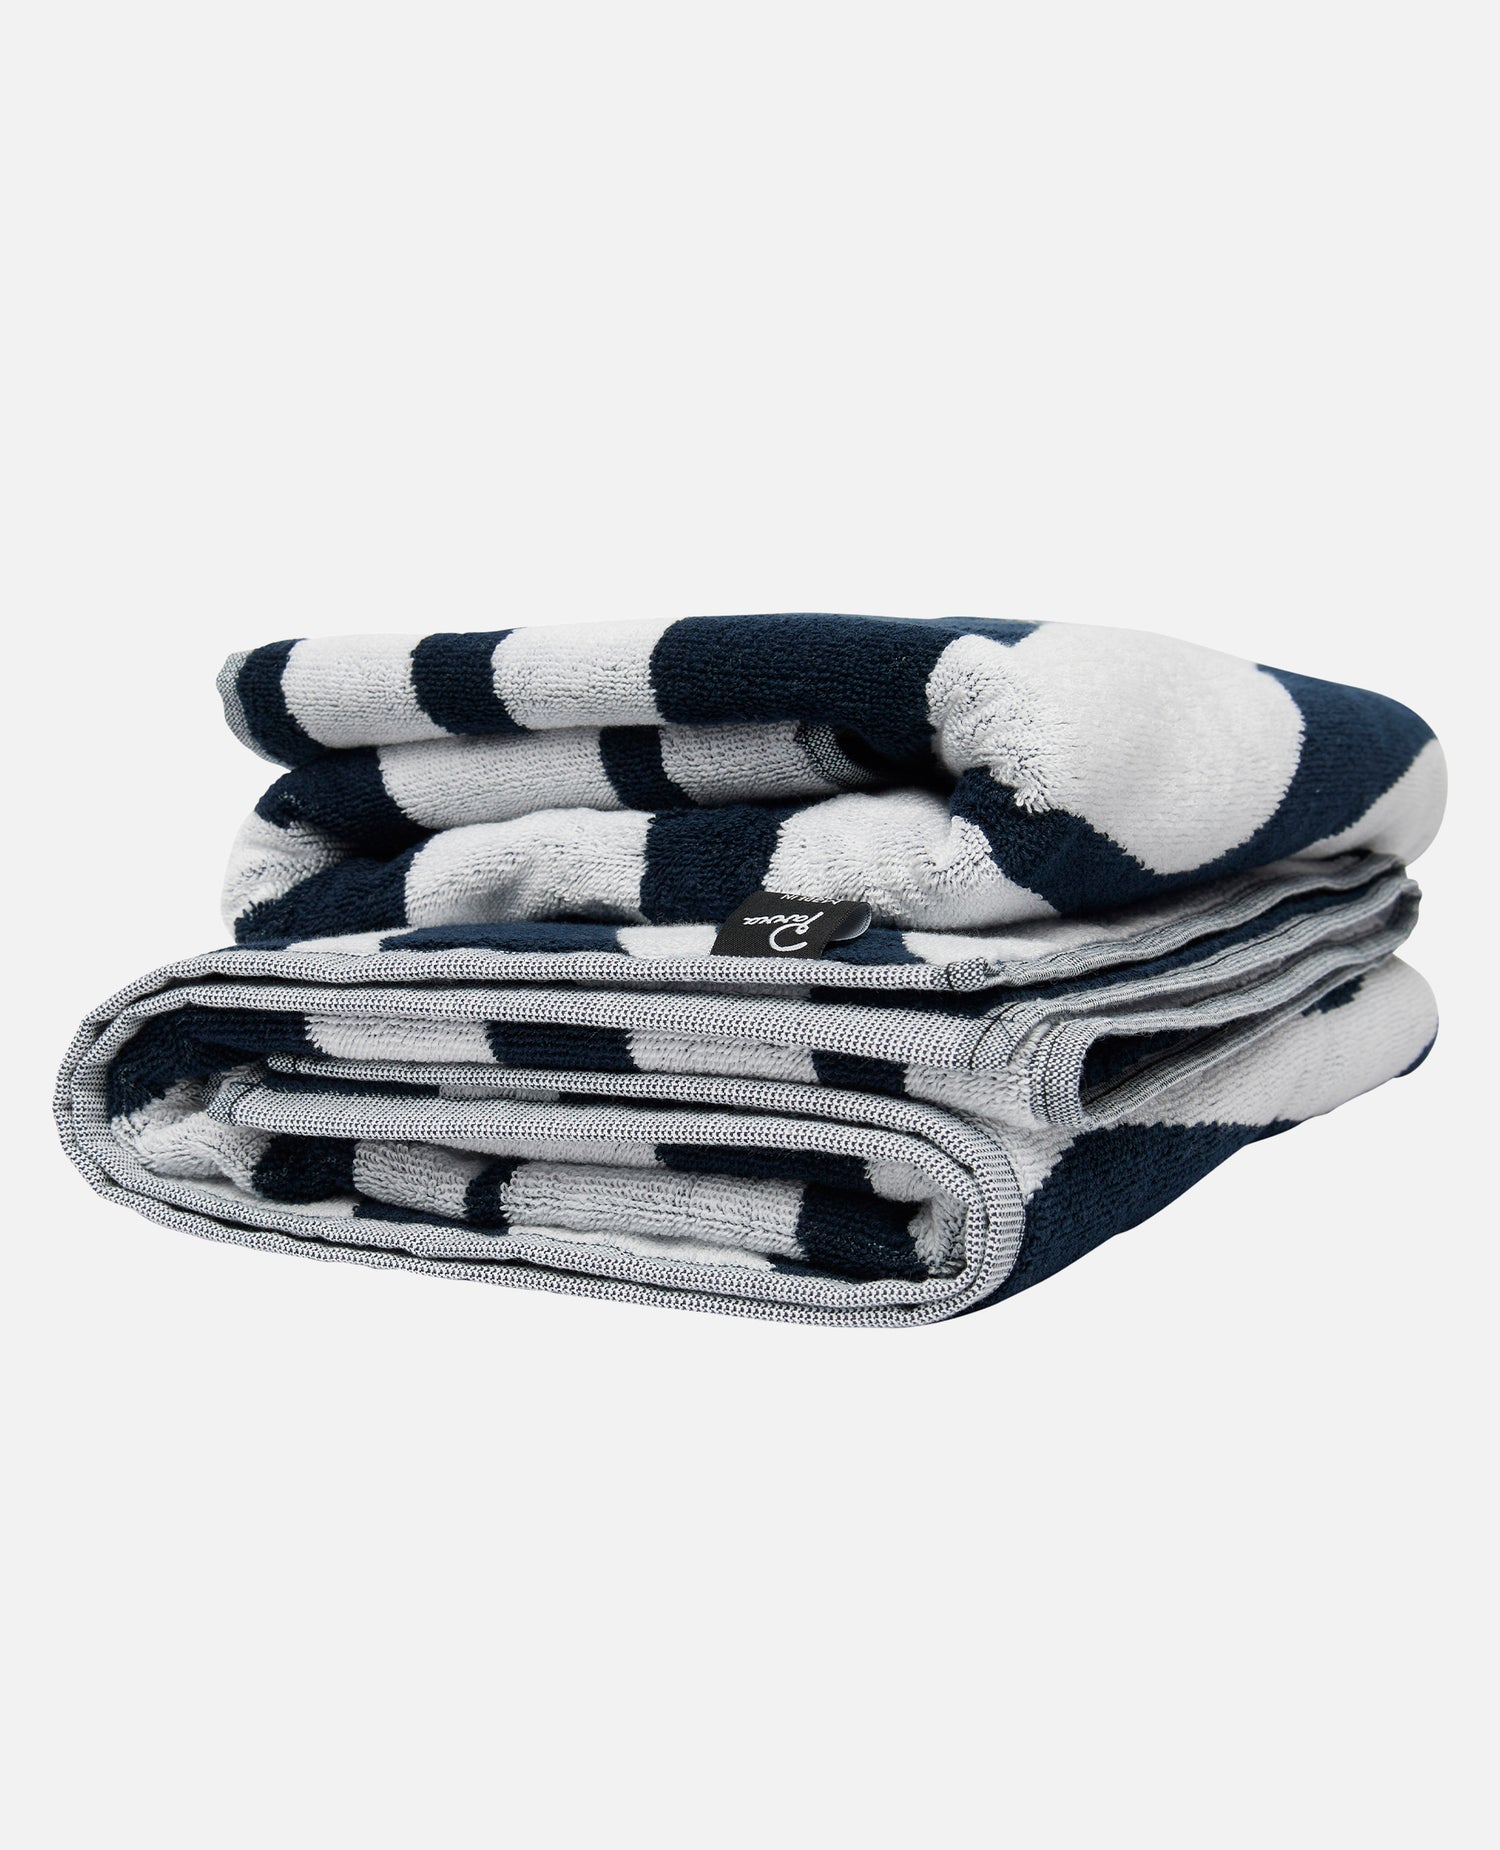 byParra Waves of the Navy Bath Towel set of 2 (Navy/White)